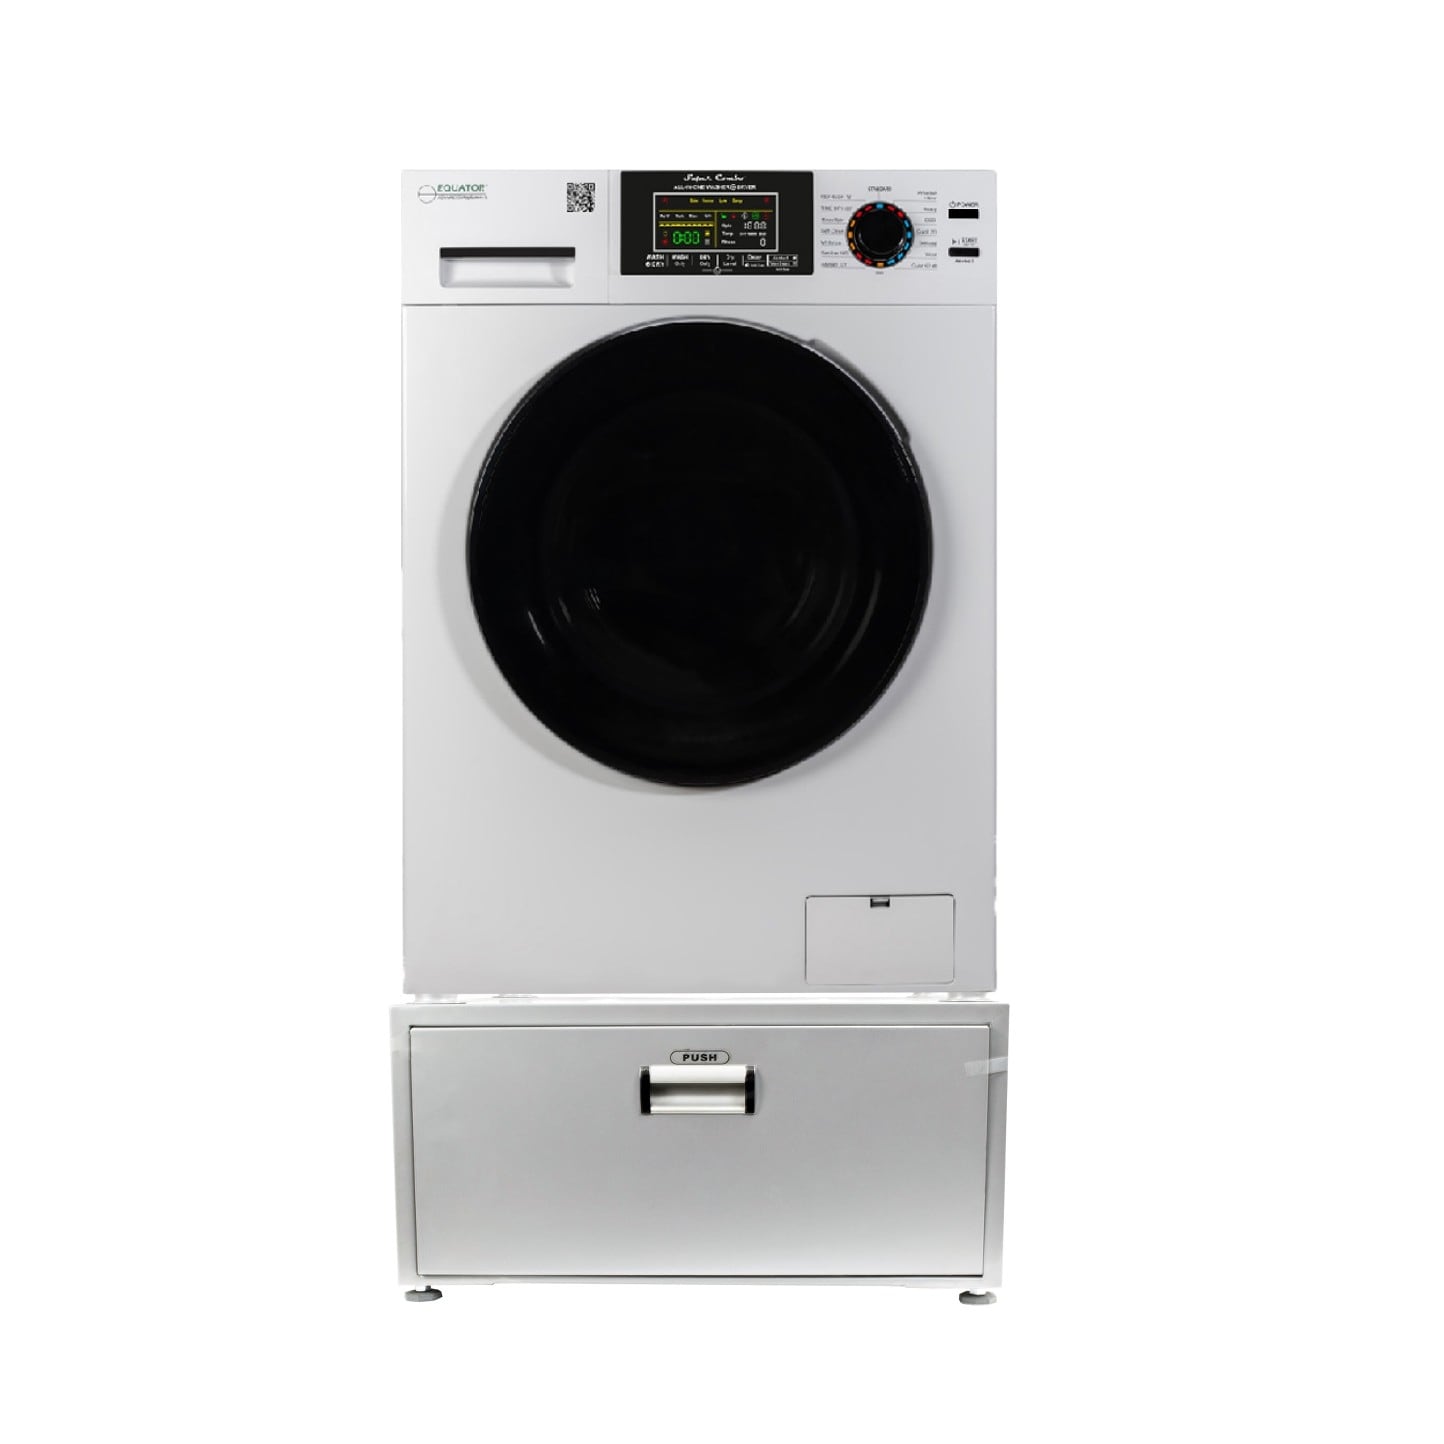 HOMCOM Compact Laundry Dryer, 1350W 3.22cu.ft Portable Clothes Dryer with 5 Drying